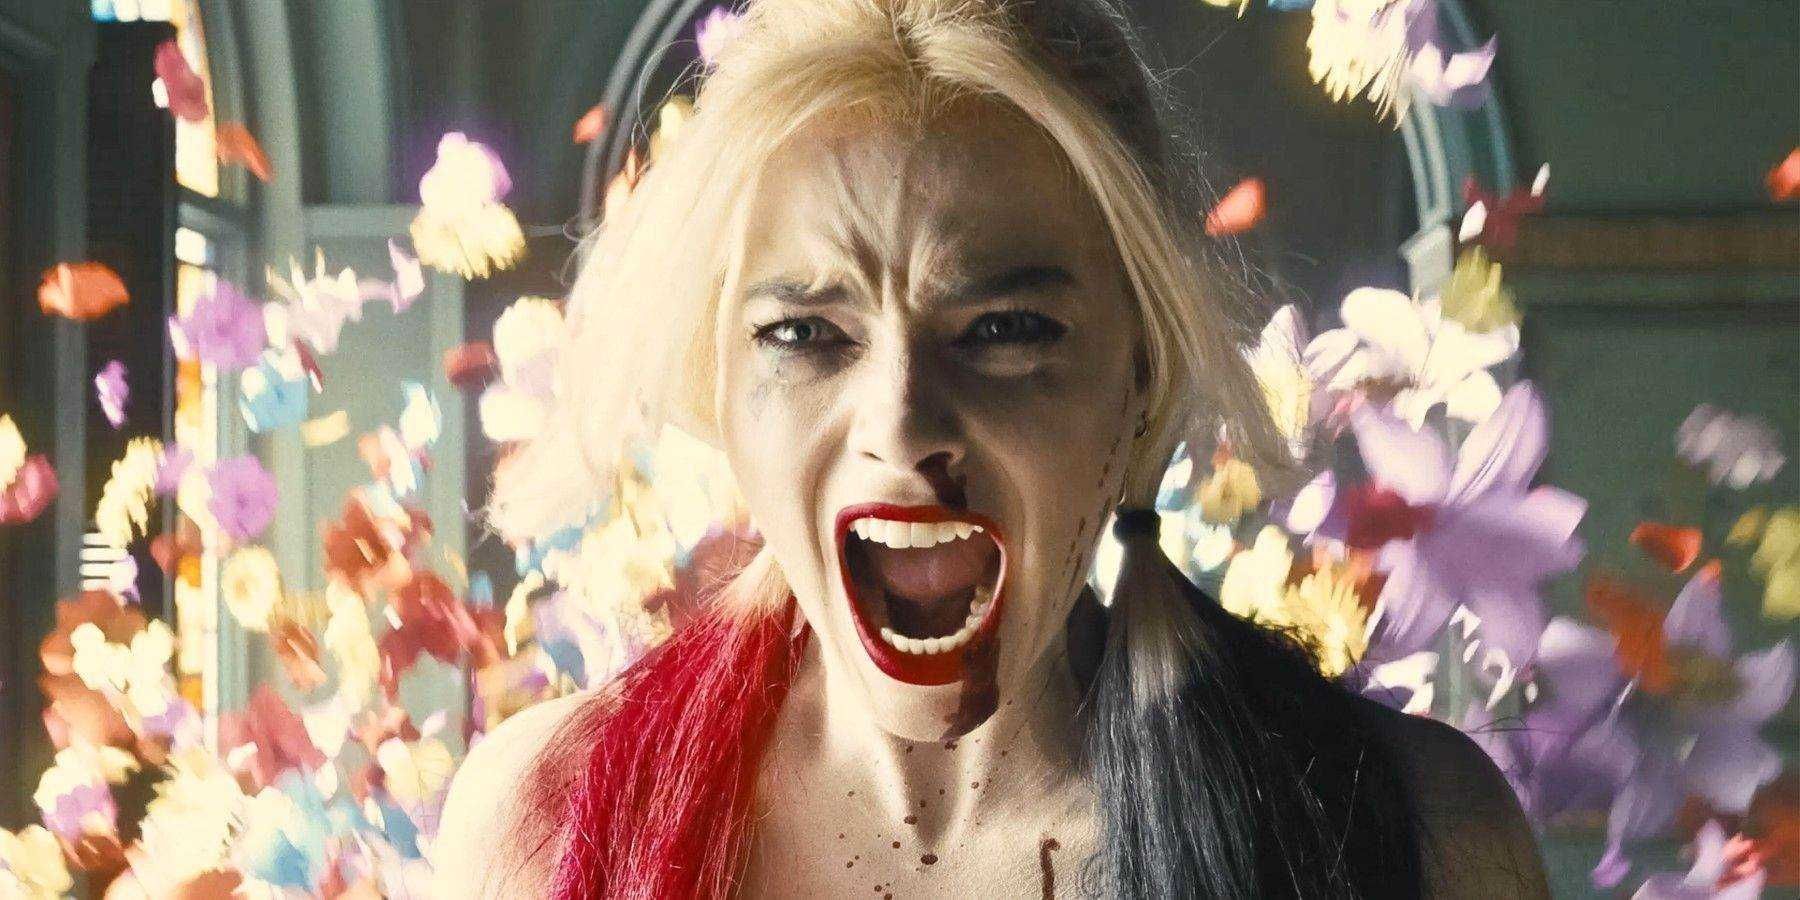 Harley Quinn enters a flowery dreamscape in The Suicide Squad